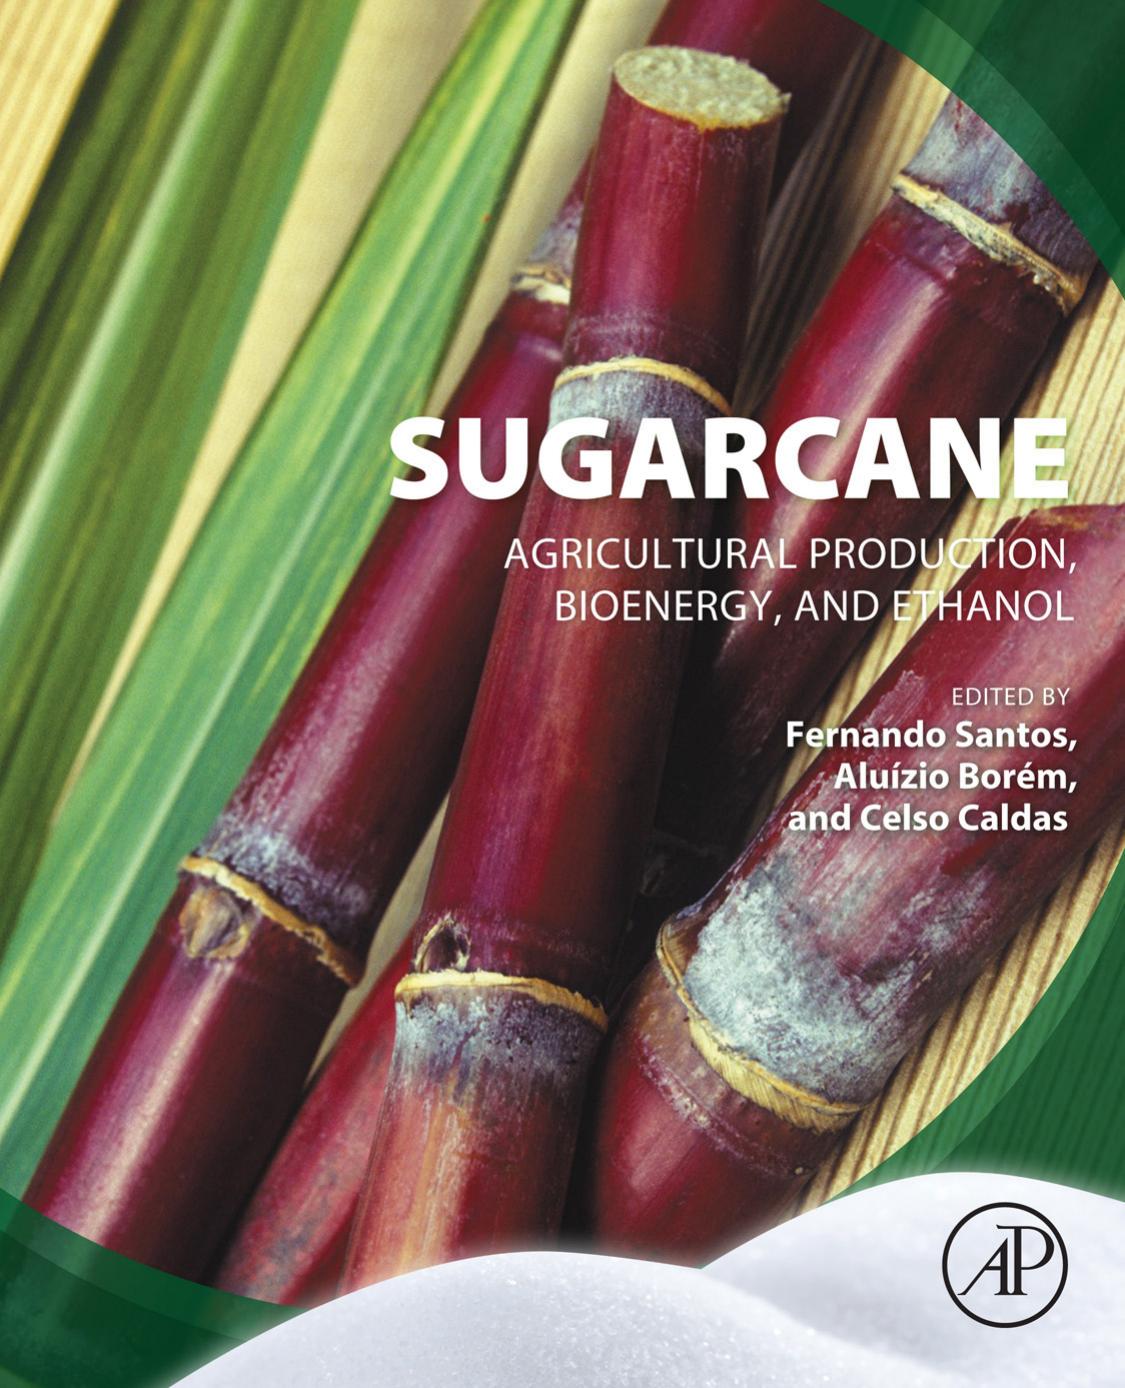 Sugarcane: Agricultural Production, Bioenergy, and Ethanol